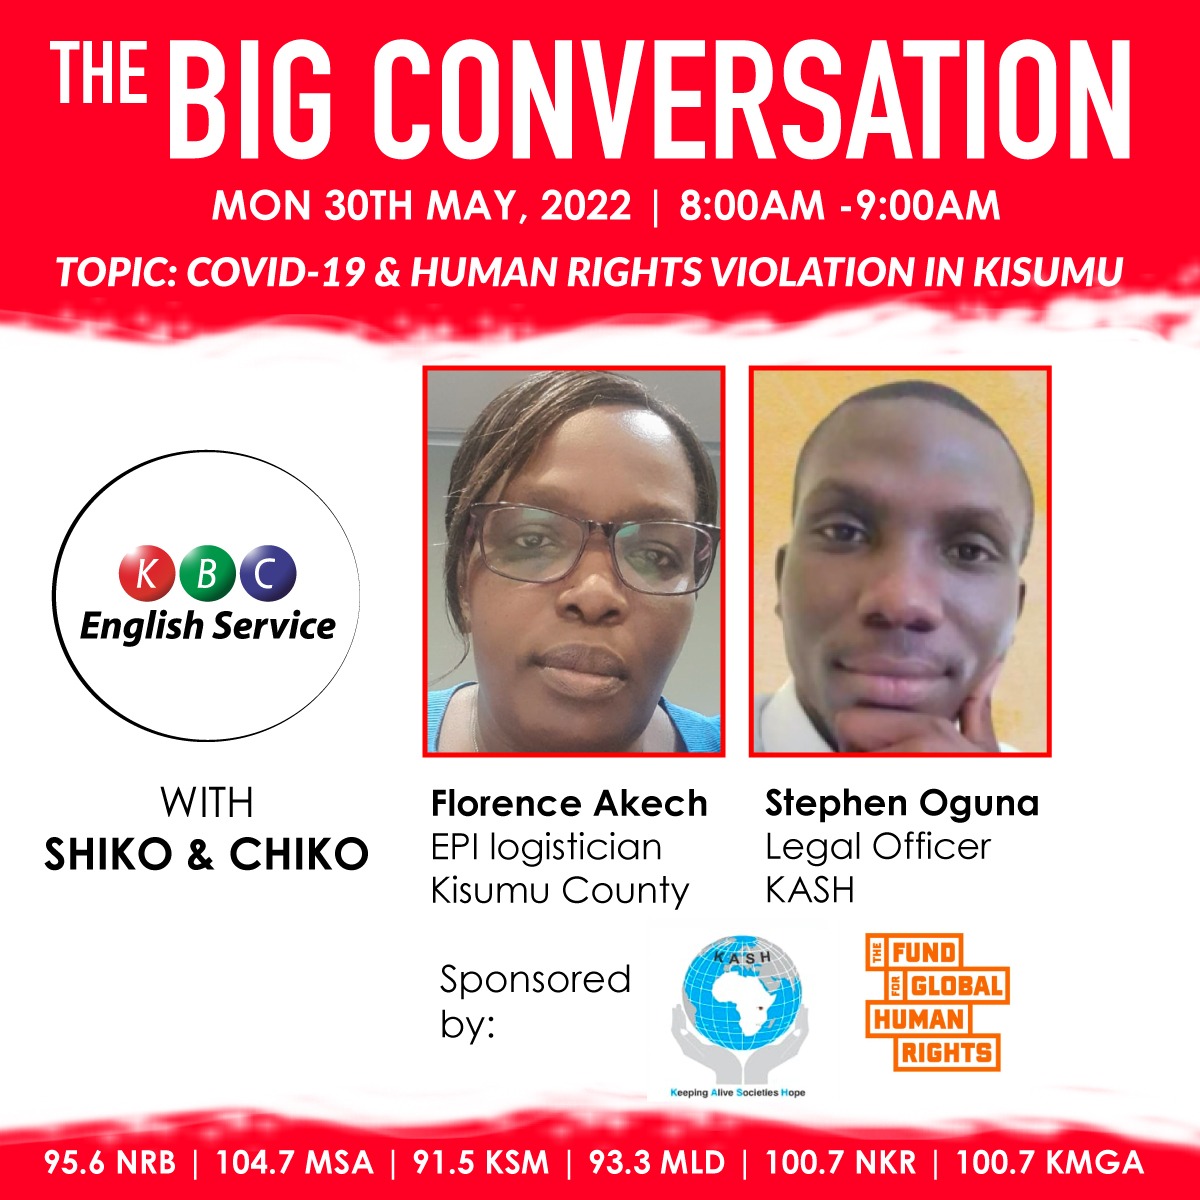 Are you in Kisumu City? Yurop if you like. The big conversation focuses on human rights violations that resulted from covid-19 restrictions and protocols.Did you suffer any injustice? Let us know.
#ShikoAndChiko
#BreakfastClubKBC
@kbcenglish